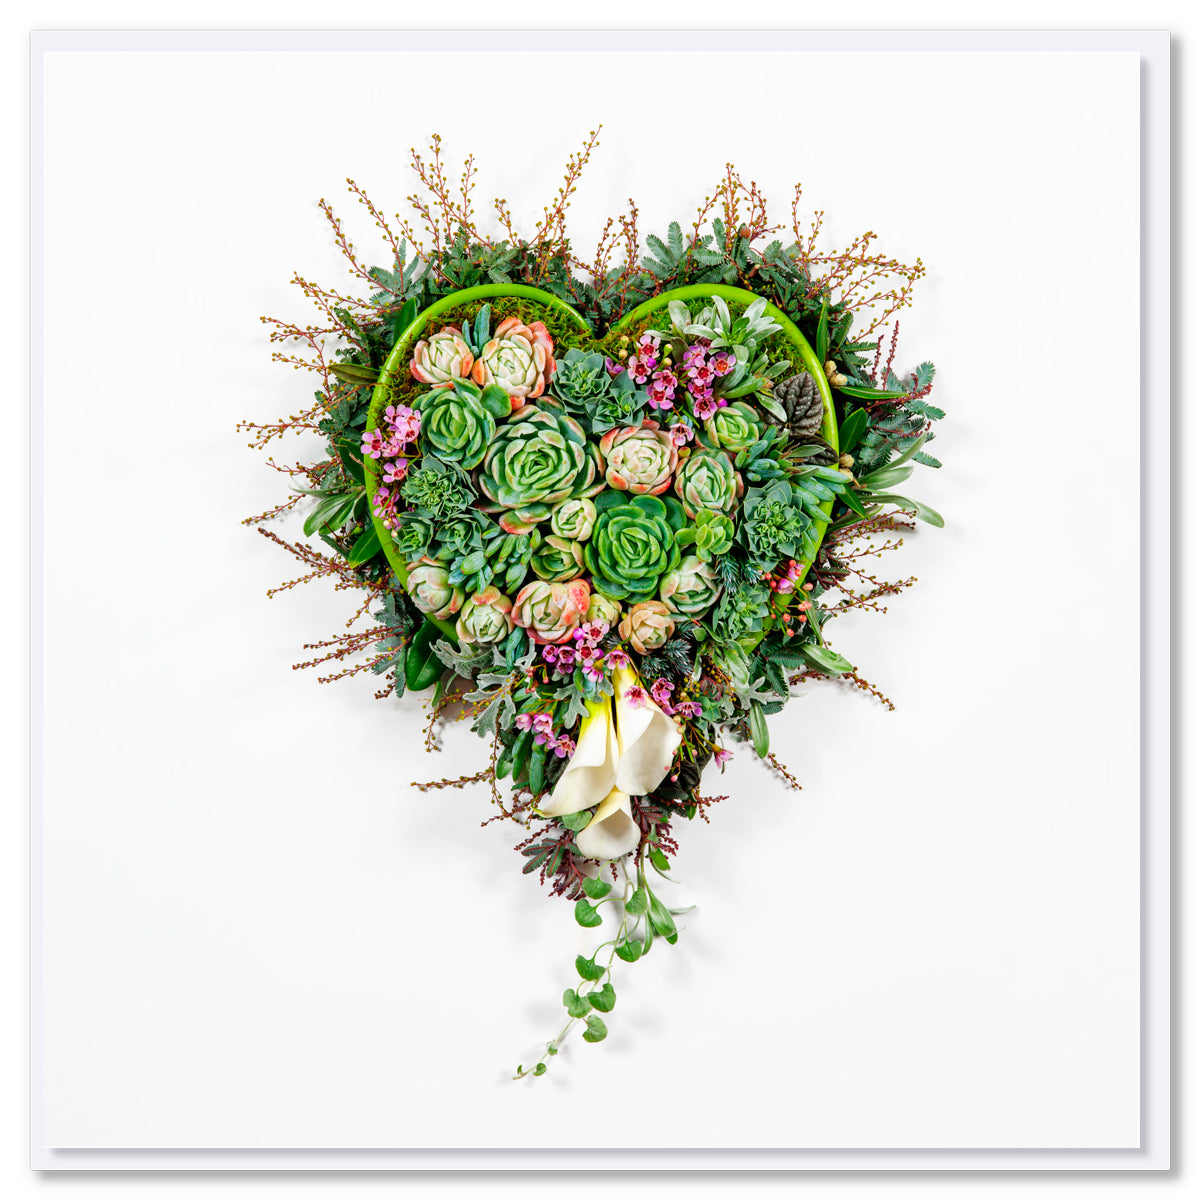 Succulent Heart Greeting Card